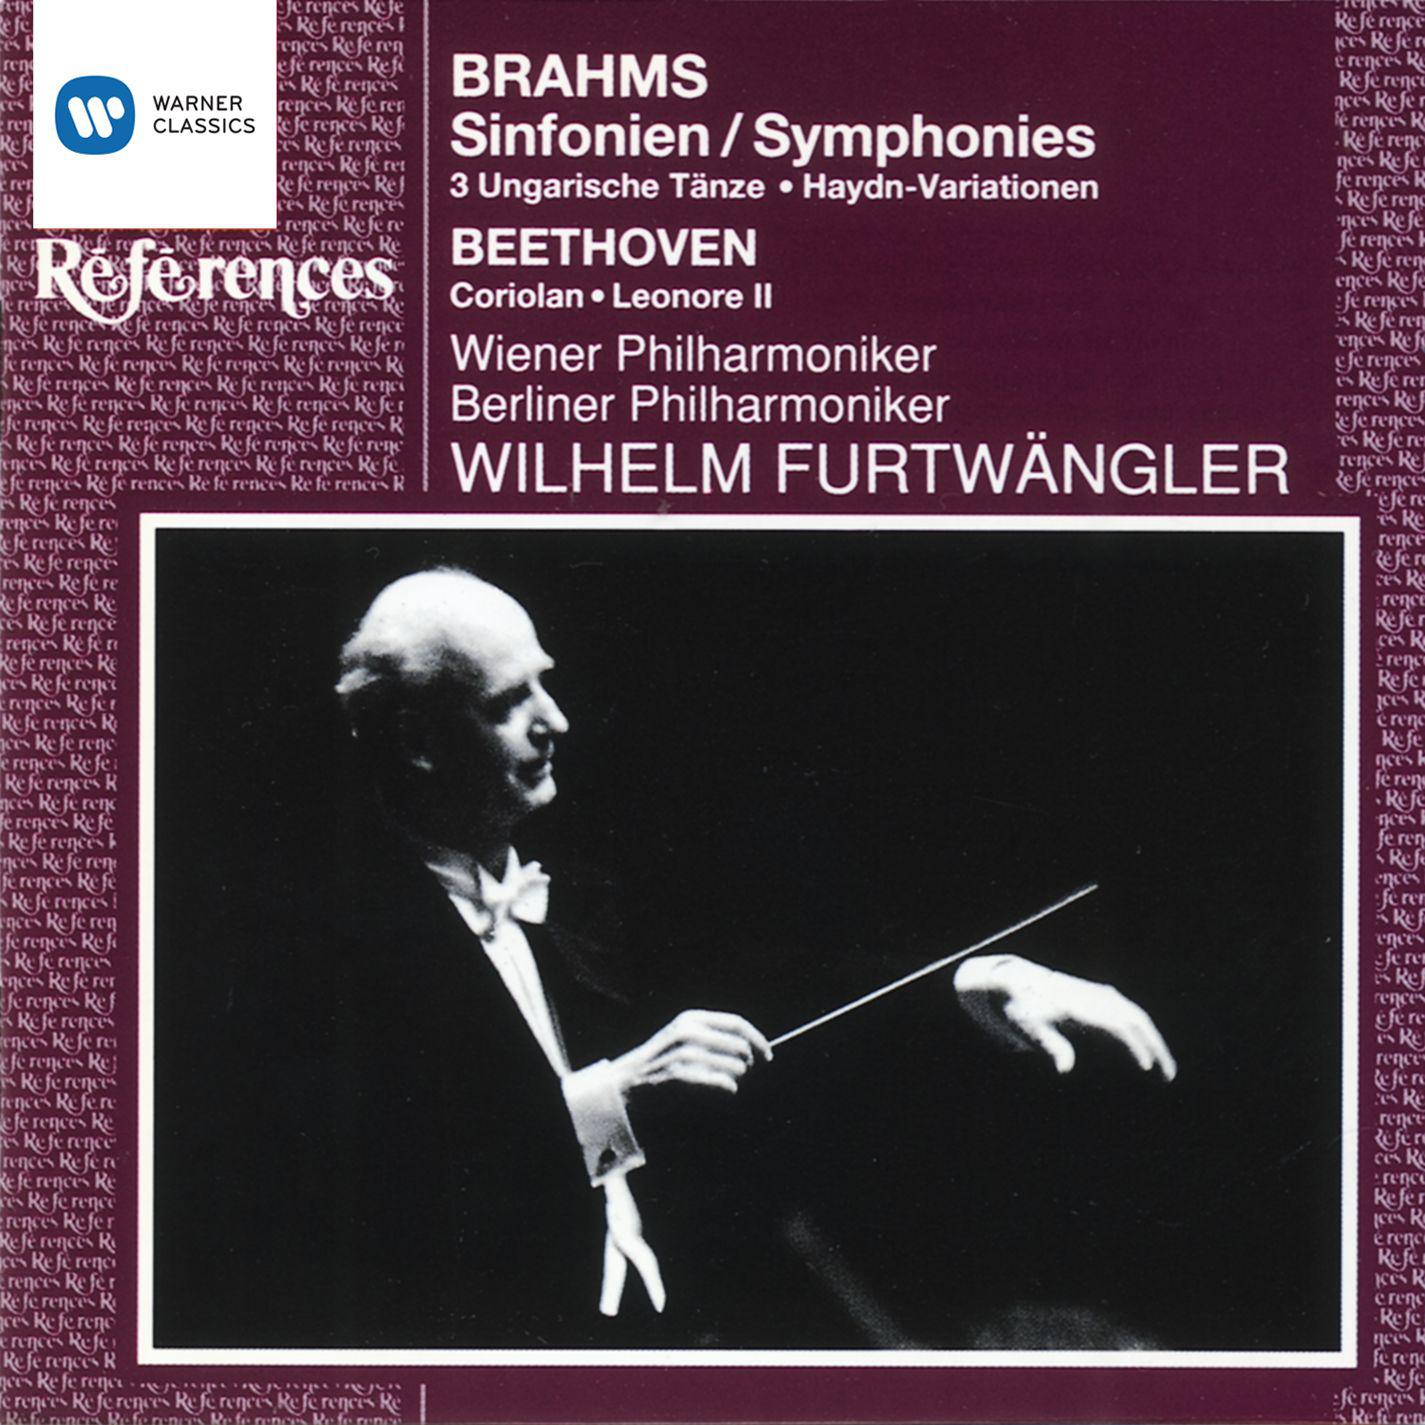 Furtw ngler conducts Brahms  Beethoven